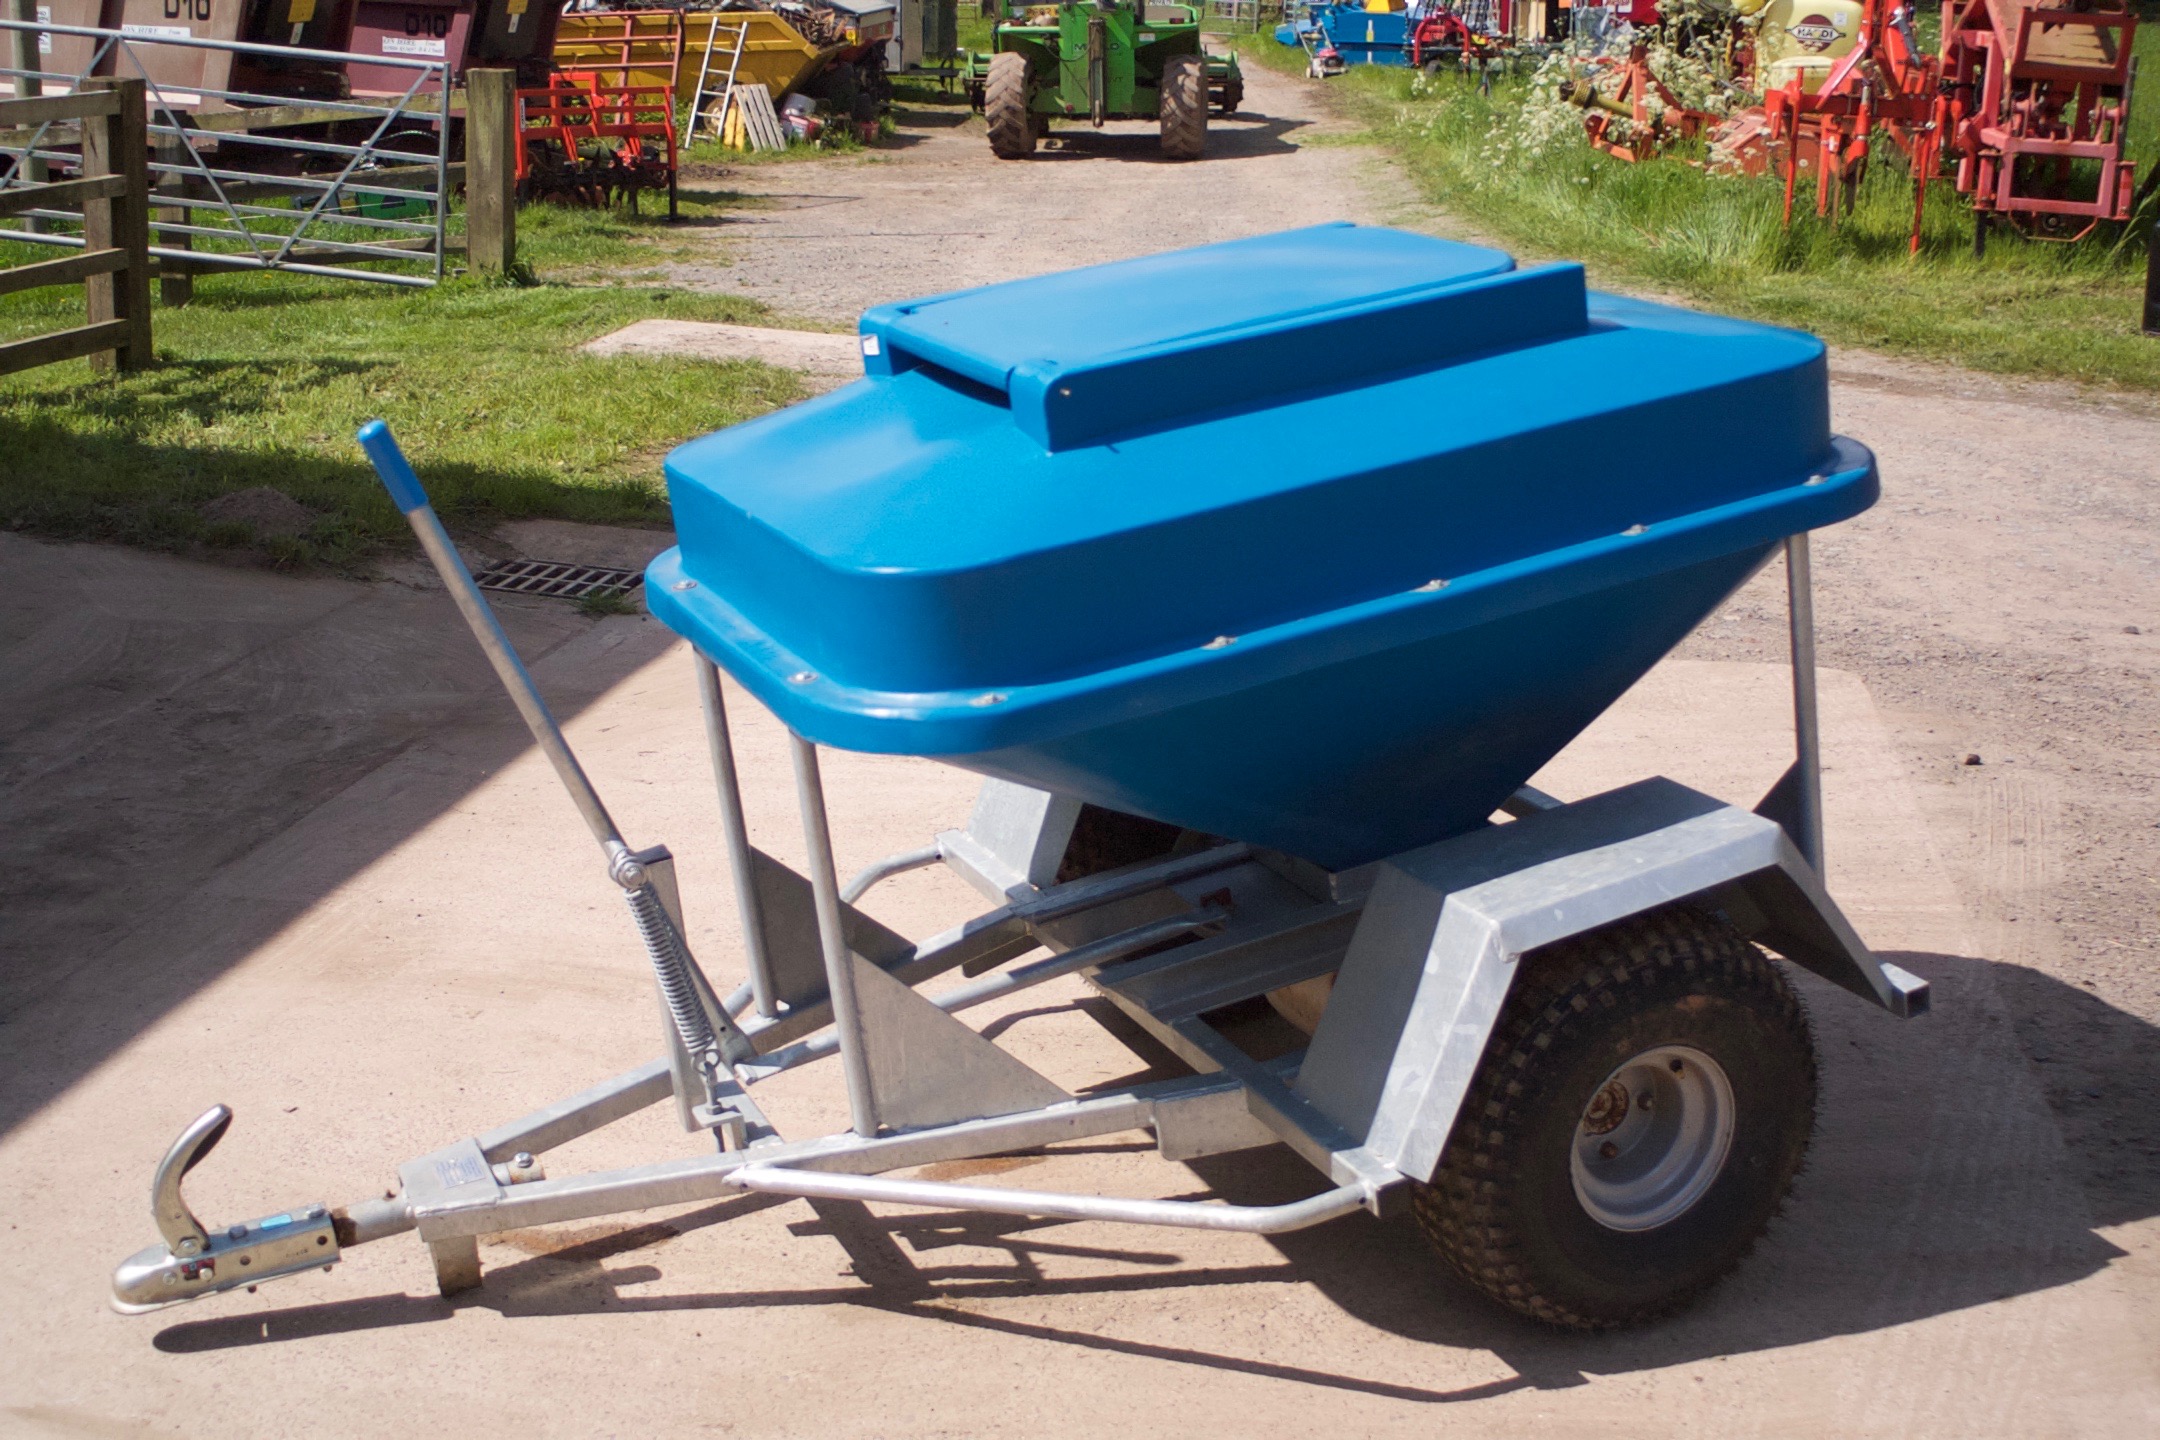 320kg capacity hopper with easy snap-shut lid. Barrel-type dispenser with 3 settings giving 0.75 to 2.5kg drops